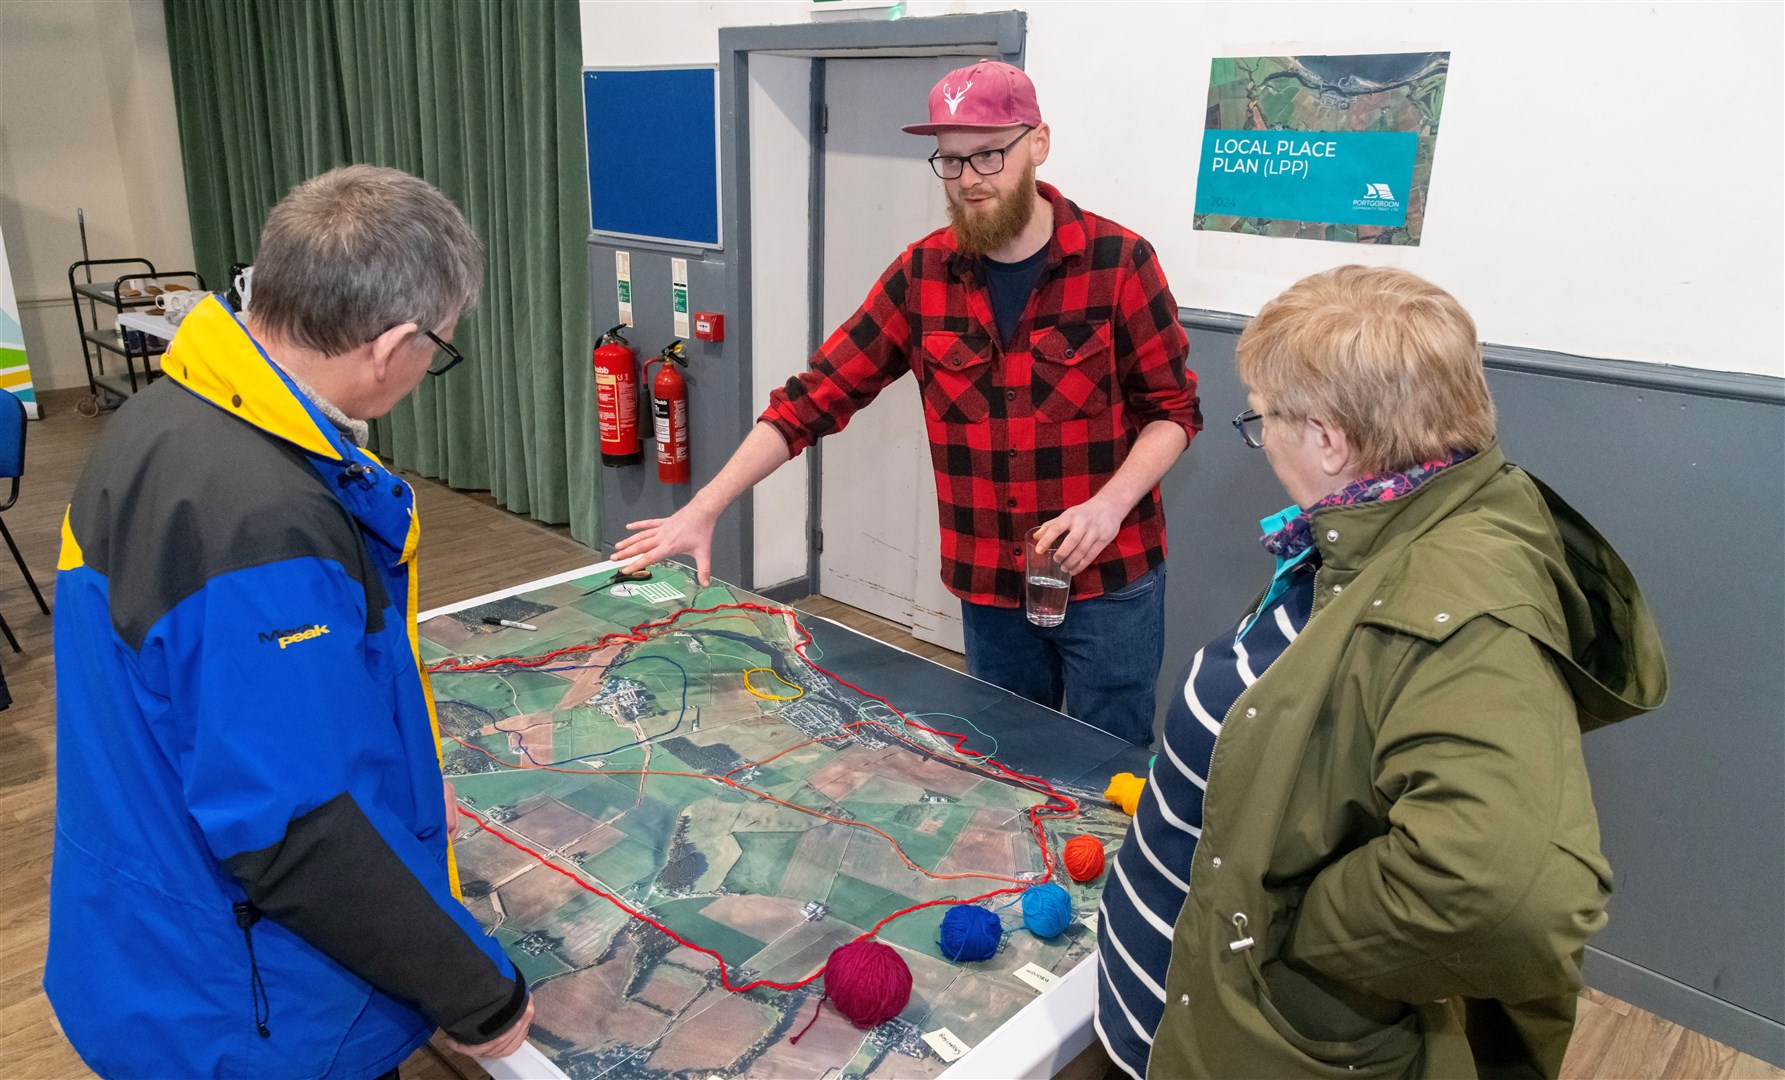 PCT director Drew Ewen (centre), shows the Portgordon Local Place Plan to members of the public. Picture: Beth Taylor